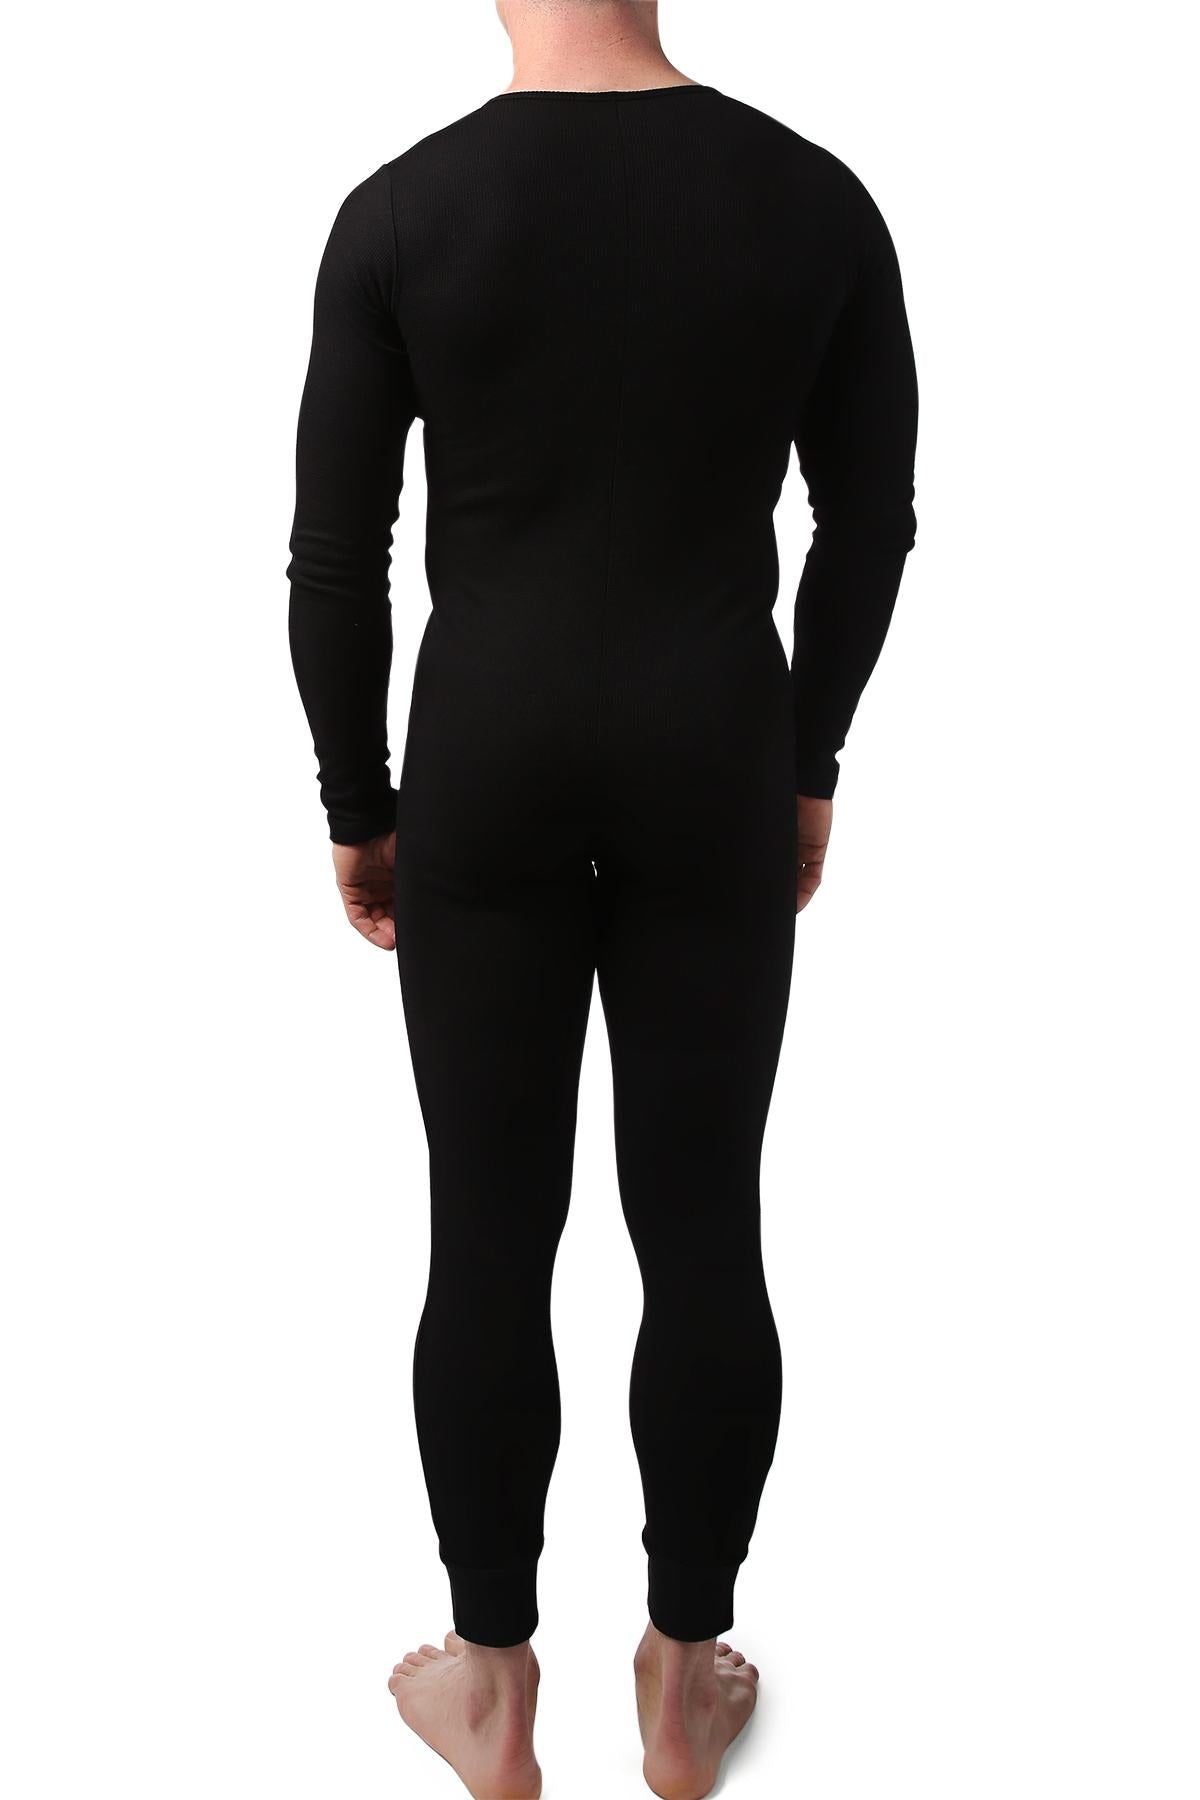 CheapUndies Black Waffle Knit Thermal Union Suit